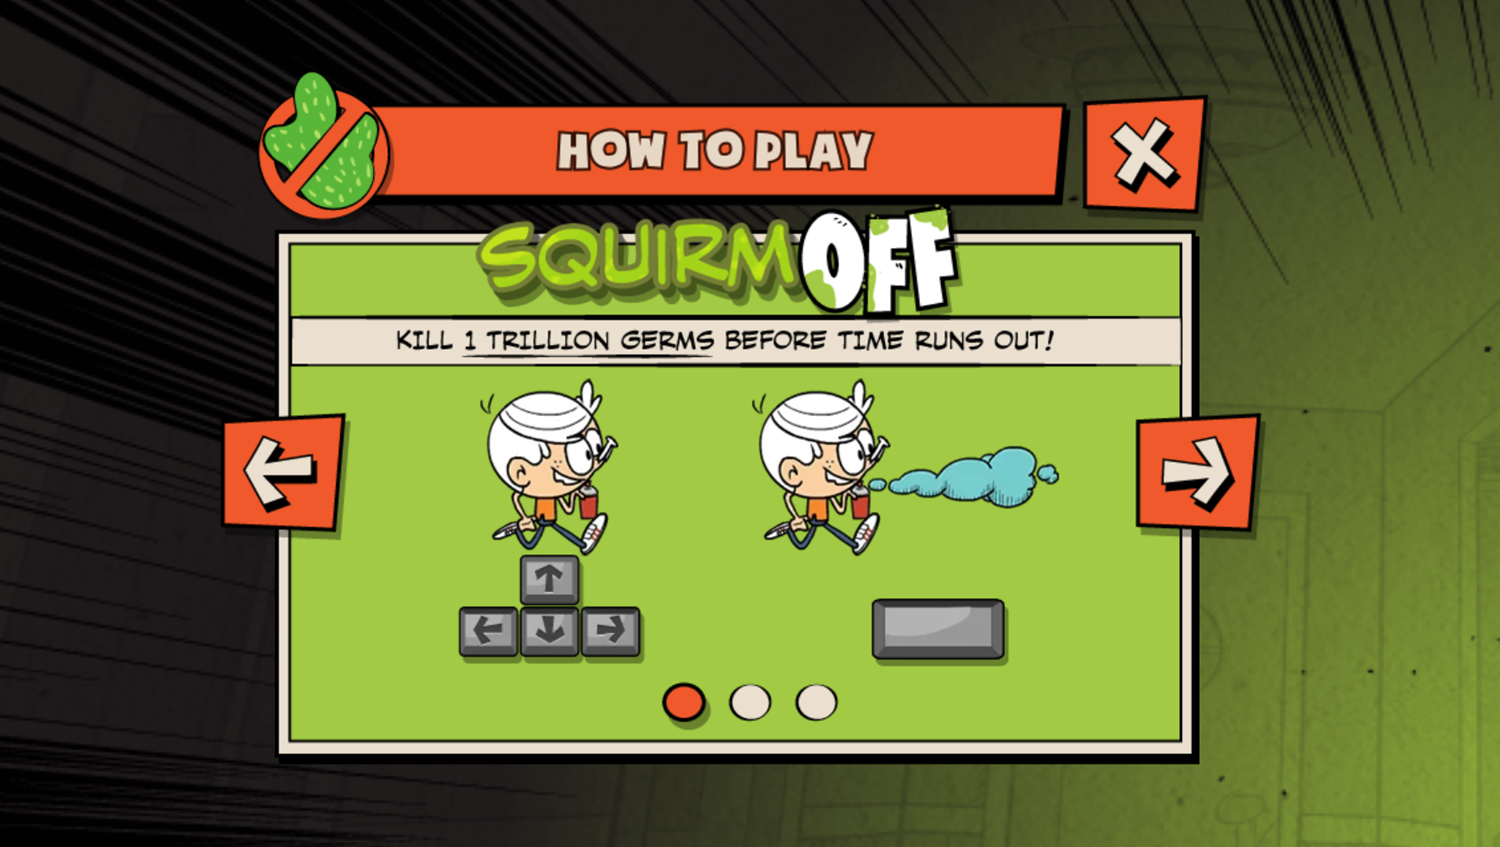 Loud House Germ Squirmish Game Squirm Off How To Play Screenshot.